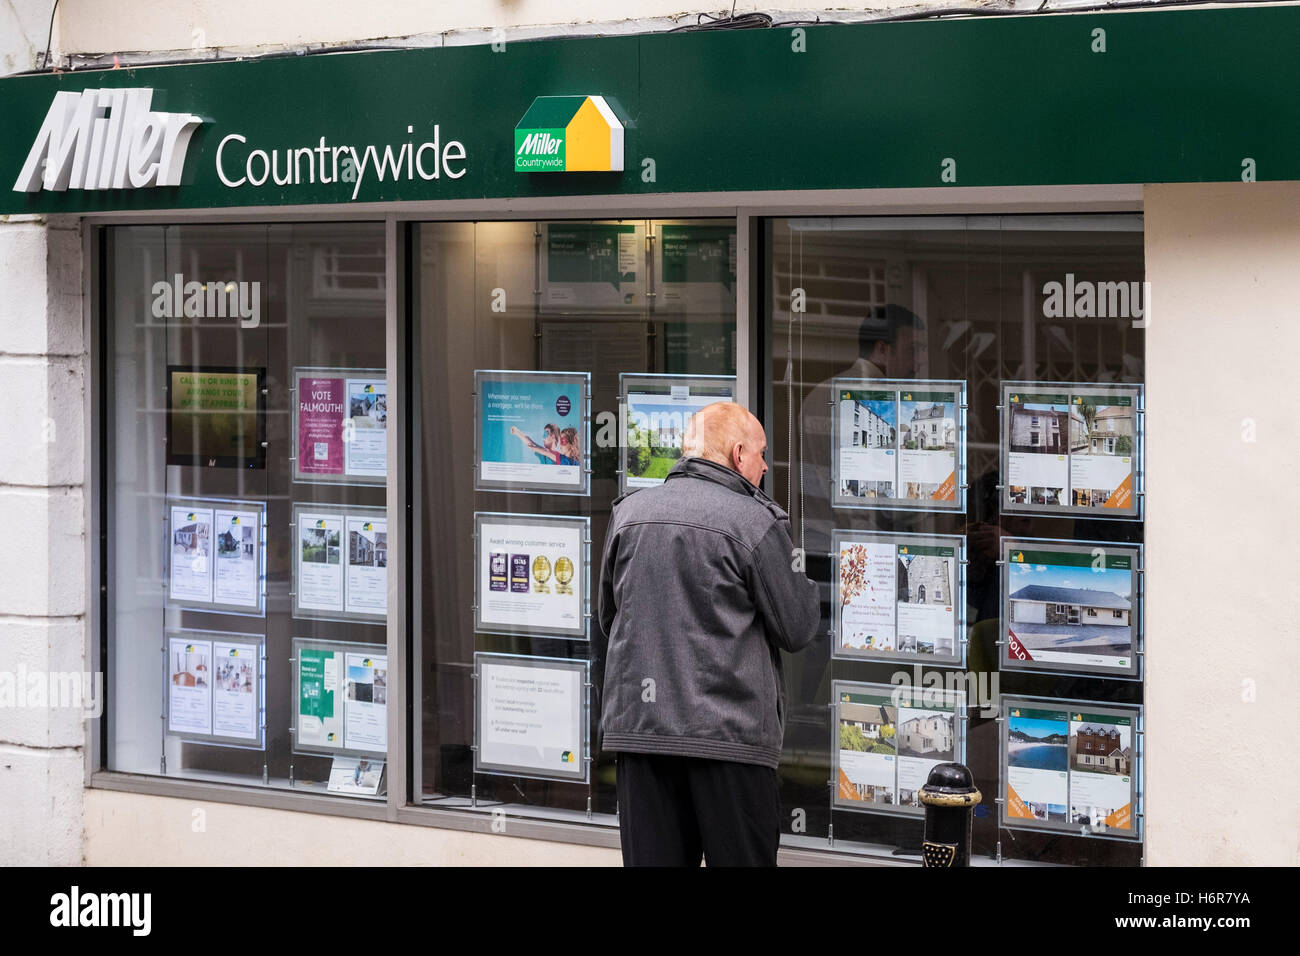 A man looking at in a Miller Countrywide estate agent window in Falmouth, Cornwall. Stock Photo